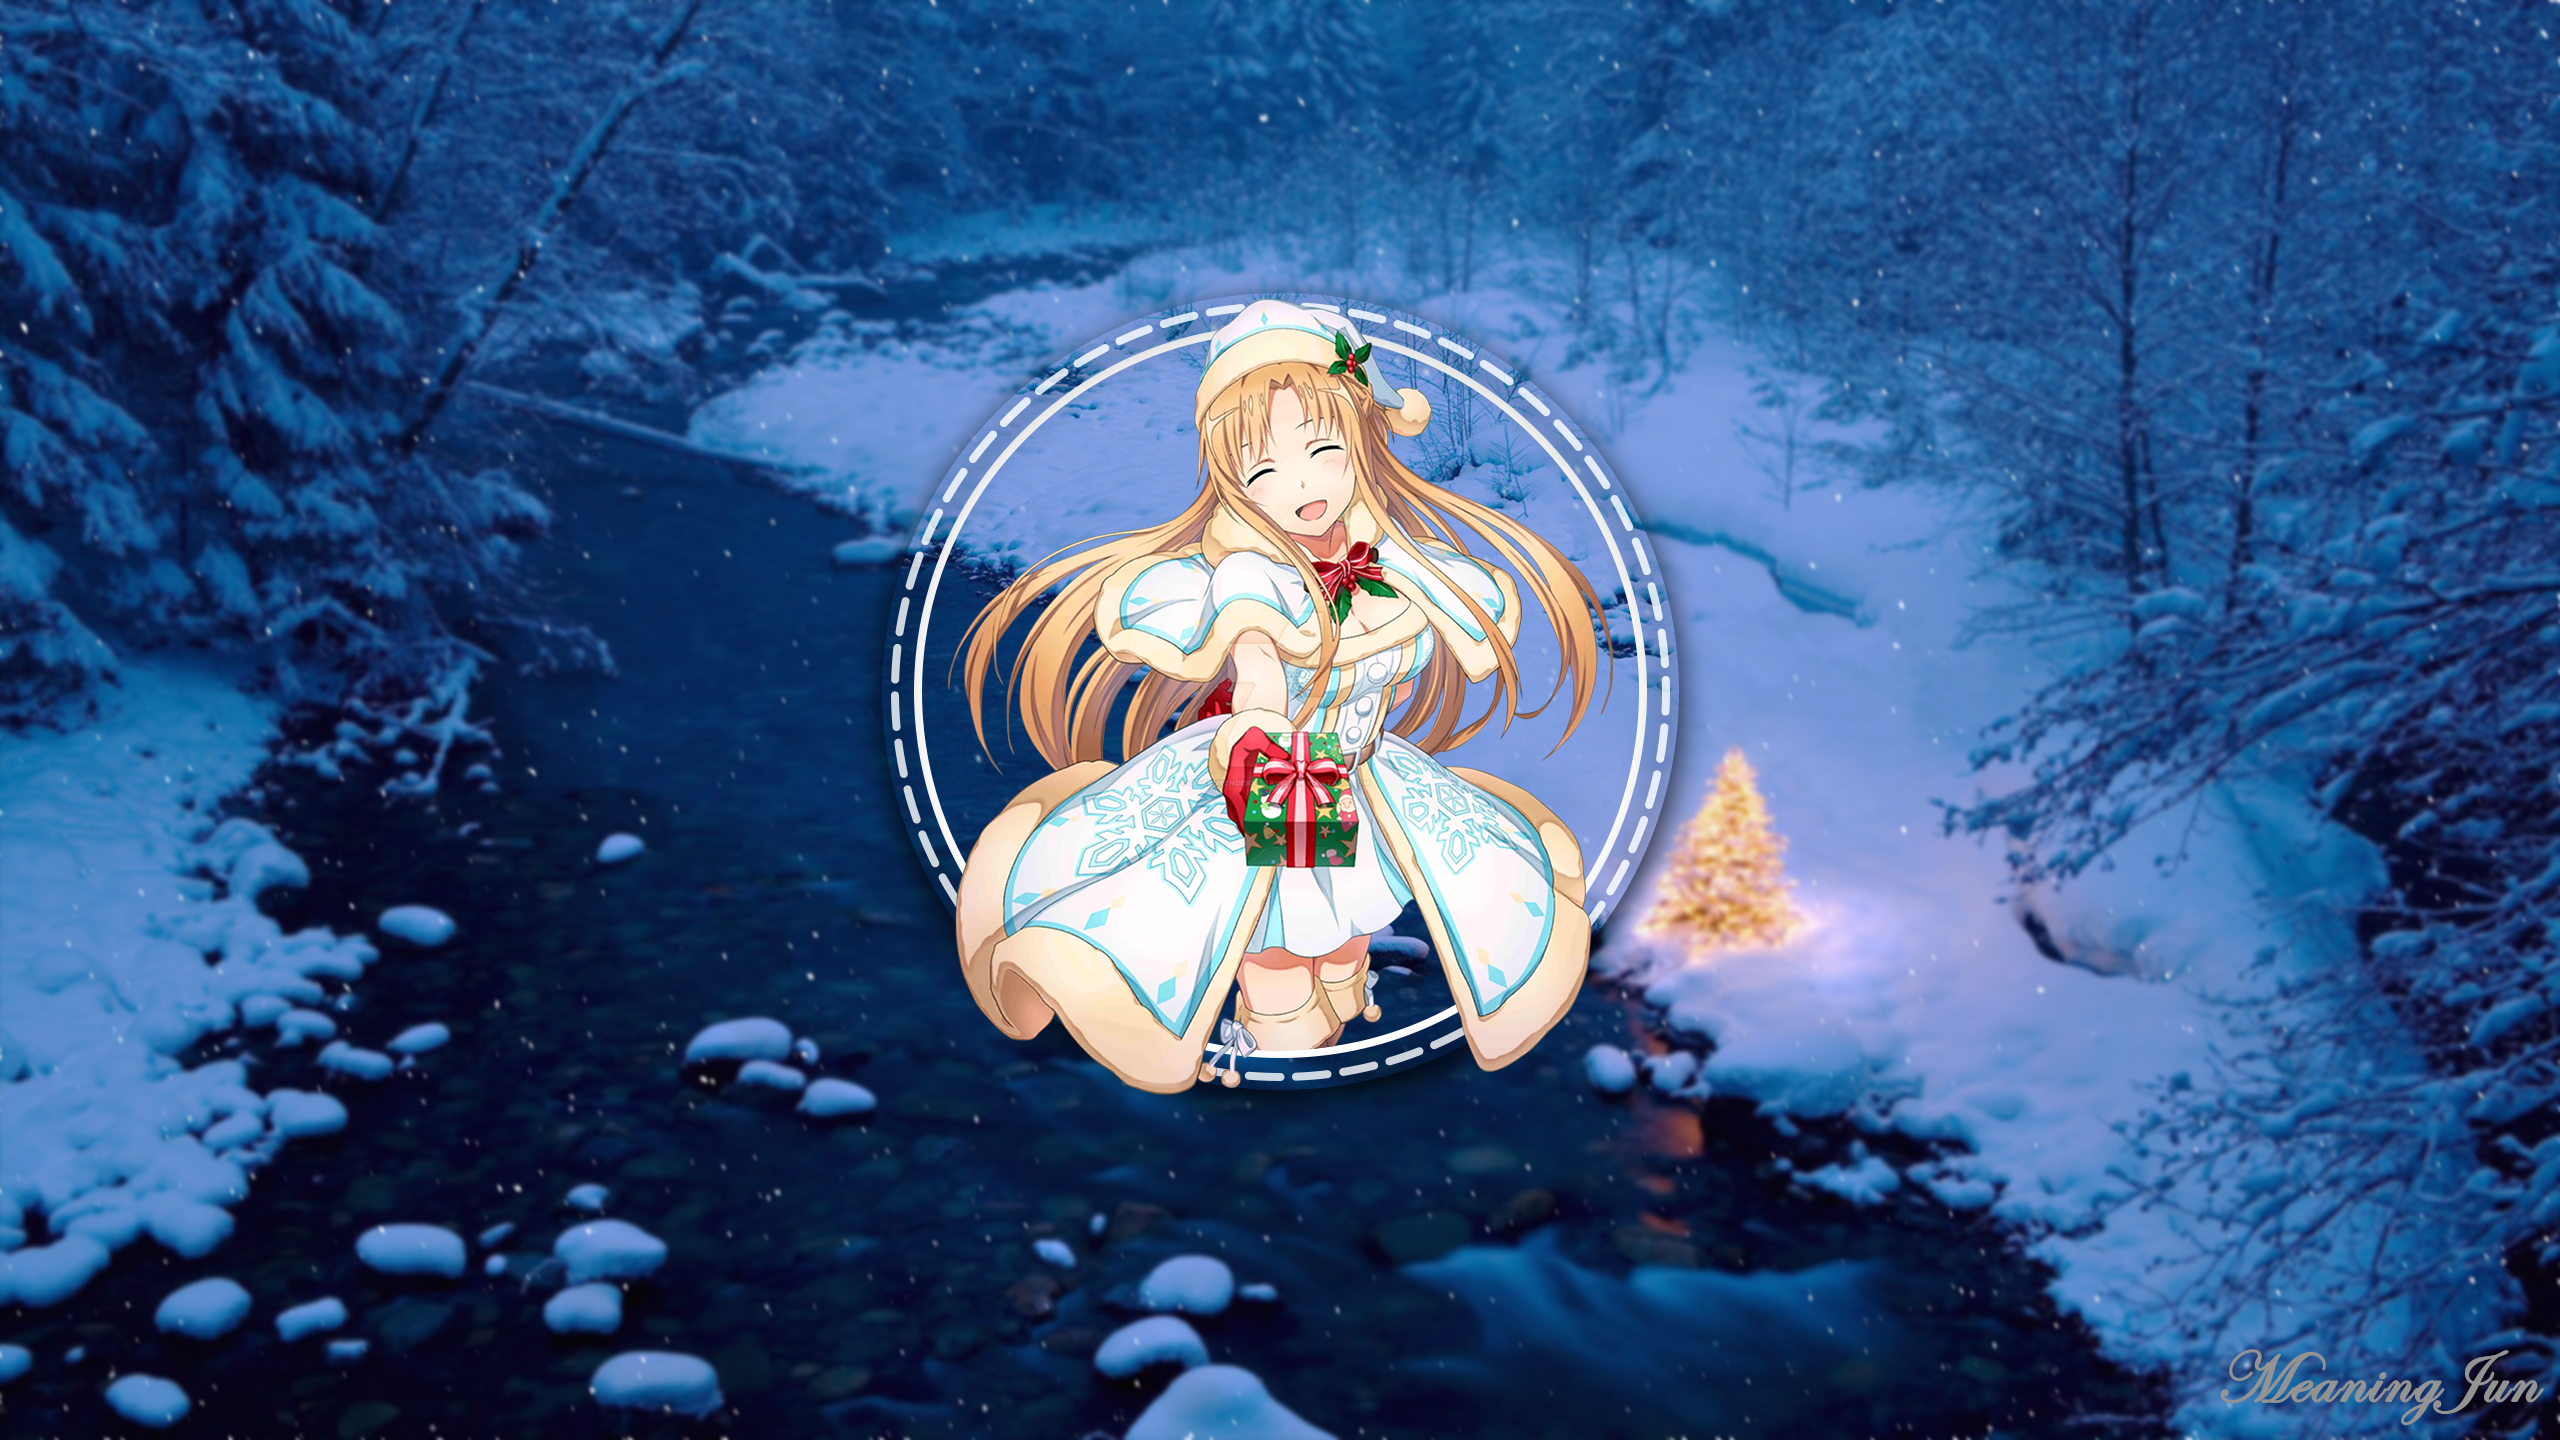 2D Anime Girls Anime Picture In Picture MeaningJun River Christmas Trees Snow Christmas Tree Forest  2560x1440